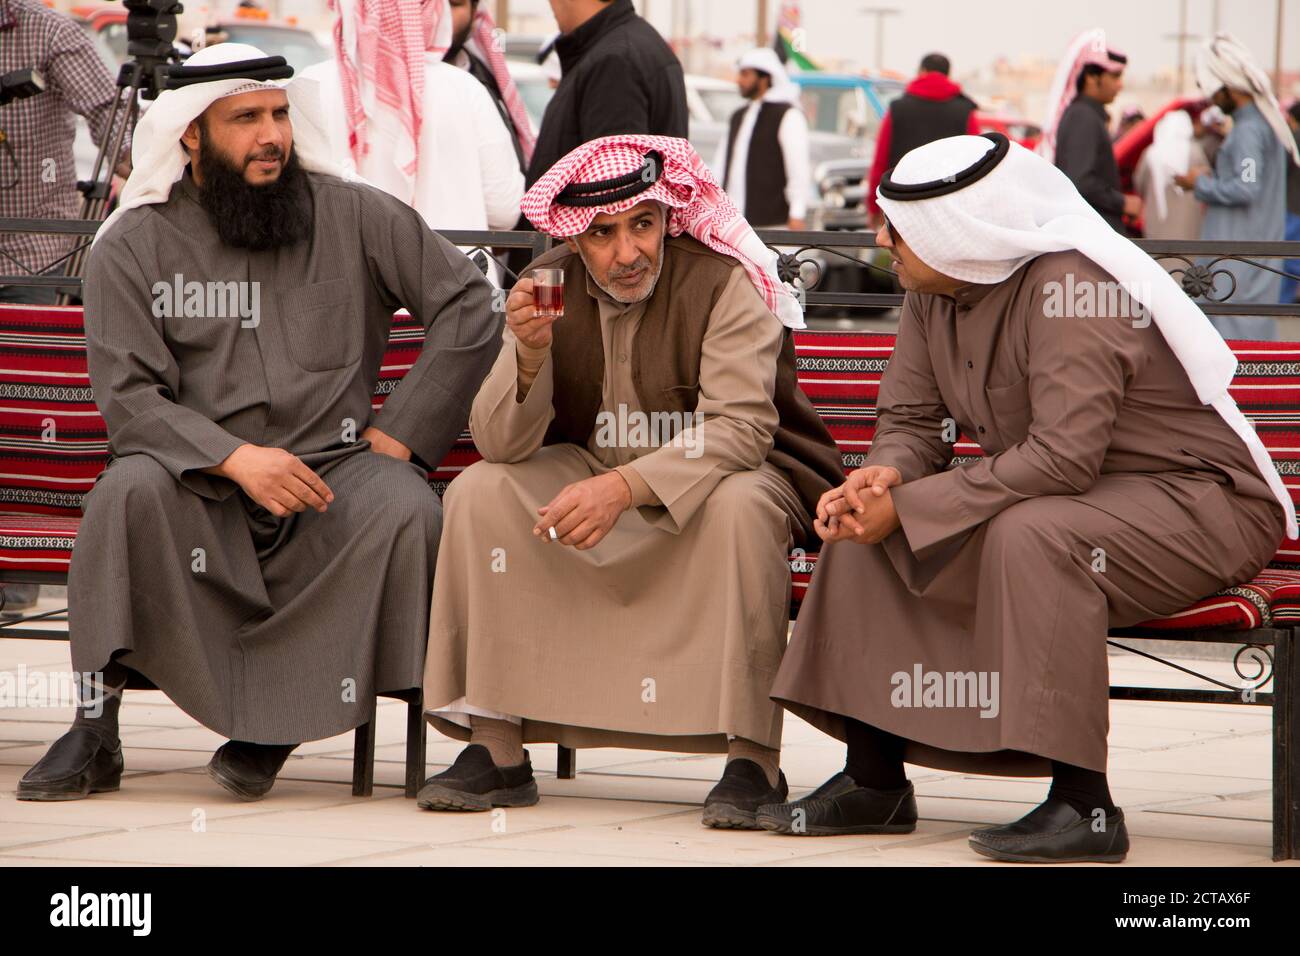 Three Kuwaiti men talking and smoking on a bench. Dressed in traditional winter colored dishdashas. Kuwait, Middle East. Stock Photo